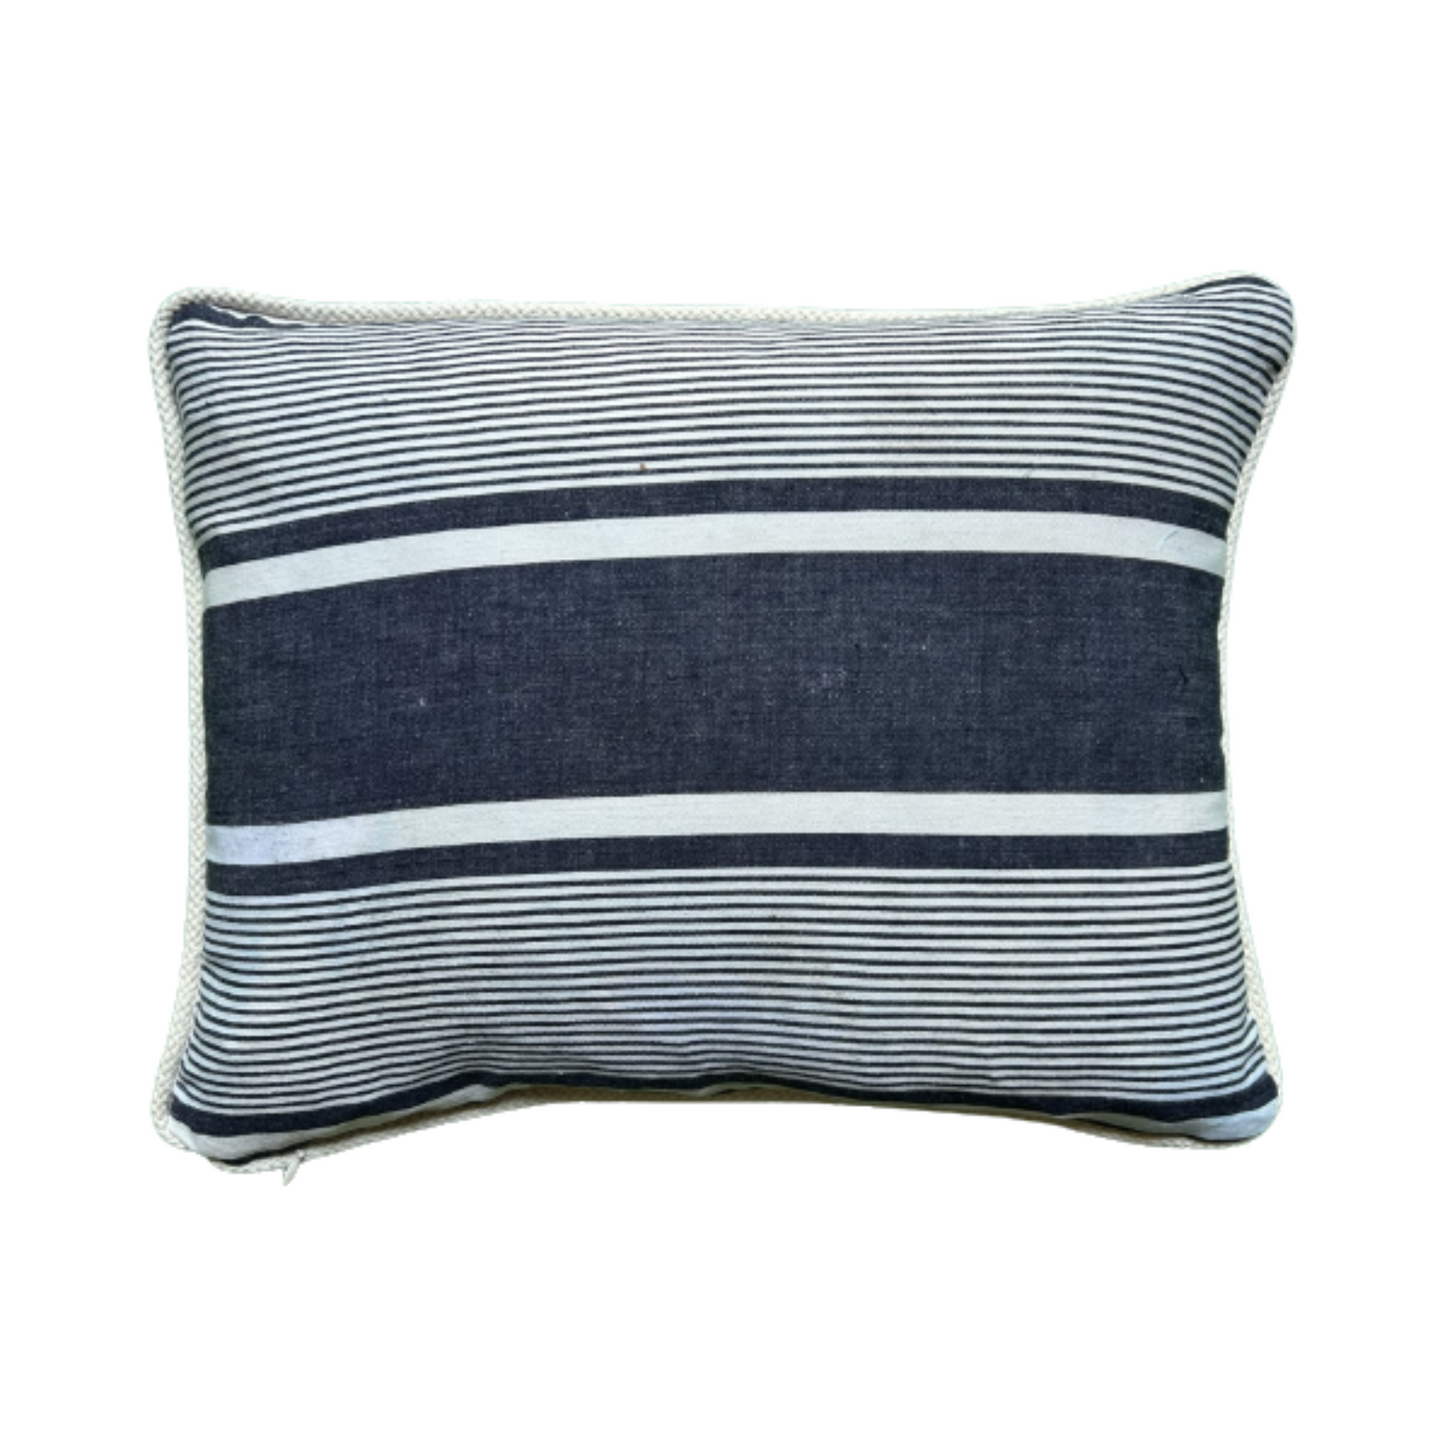 Antique Charcoal Blue Ticking Stripe 14x18 Decorative Pillow with Down Feather Insert